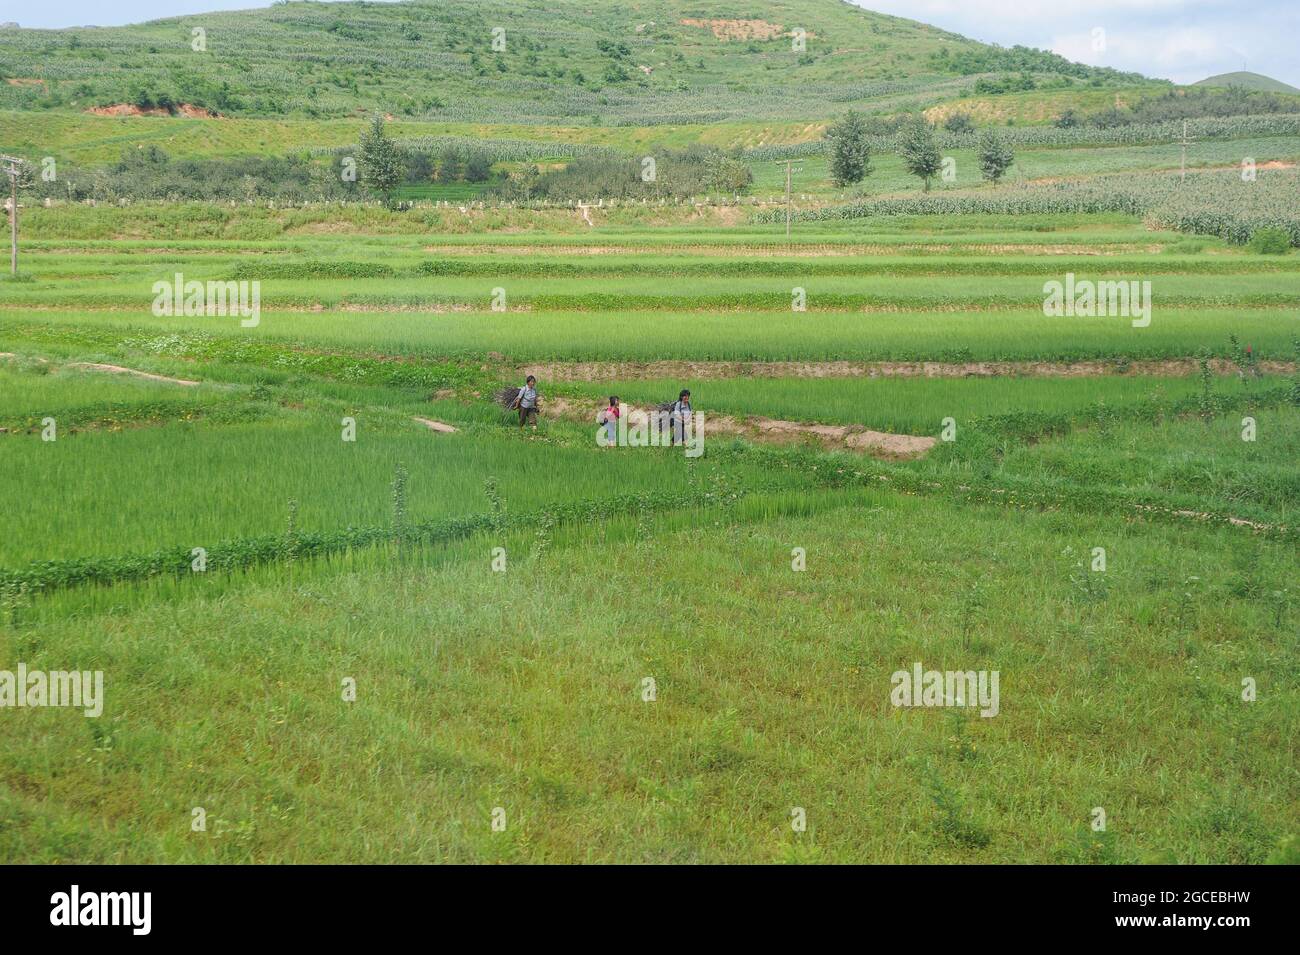 07.08.2012, North Korea, Asia - A rural scene in the countryside shows locals carrying firewood while walking through agricultural land. Stock Photo